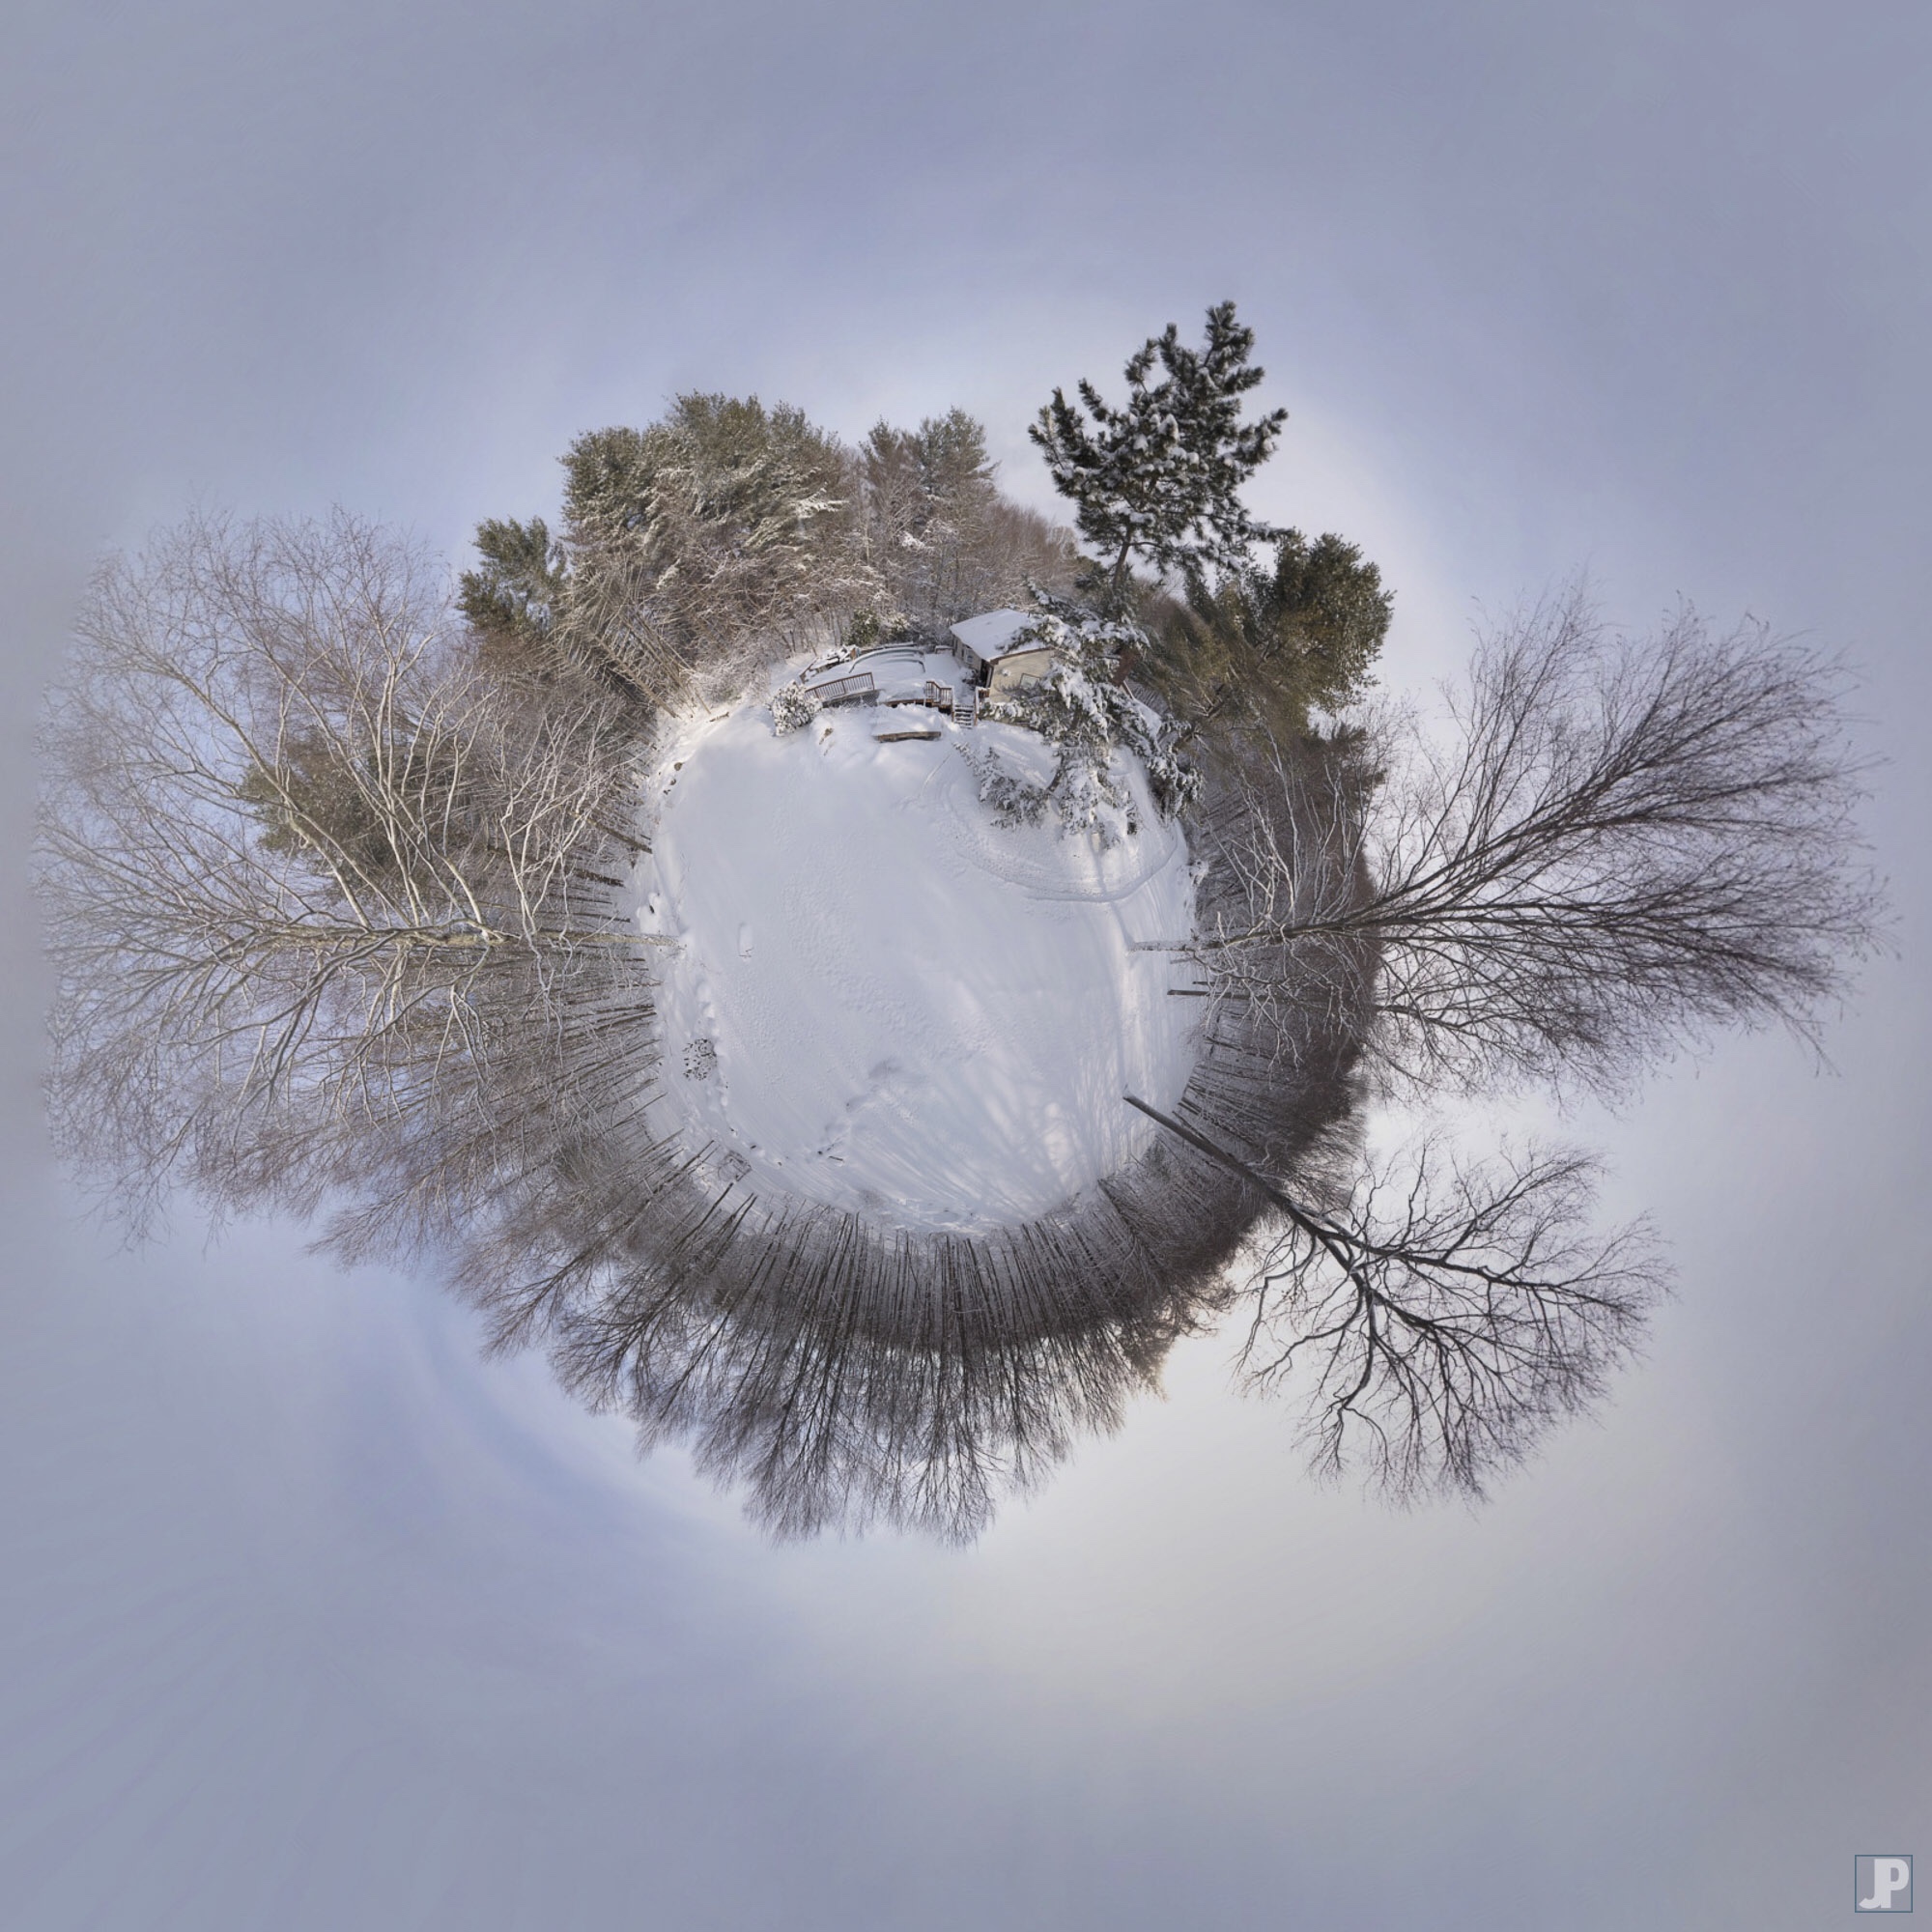 pano10001__little-planet--tonemapped-wip-[72ppi-2000px-dcip3].jpg